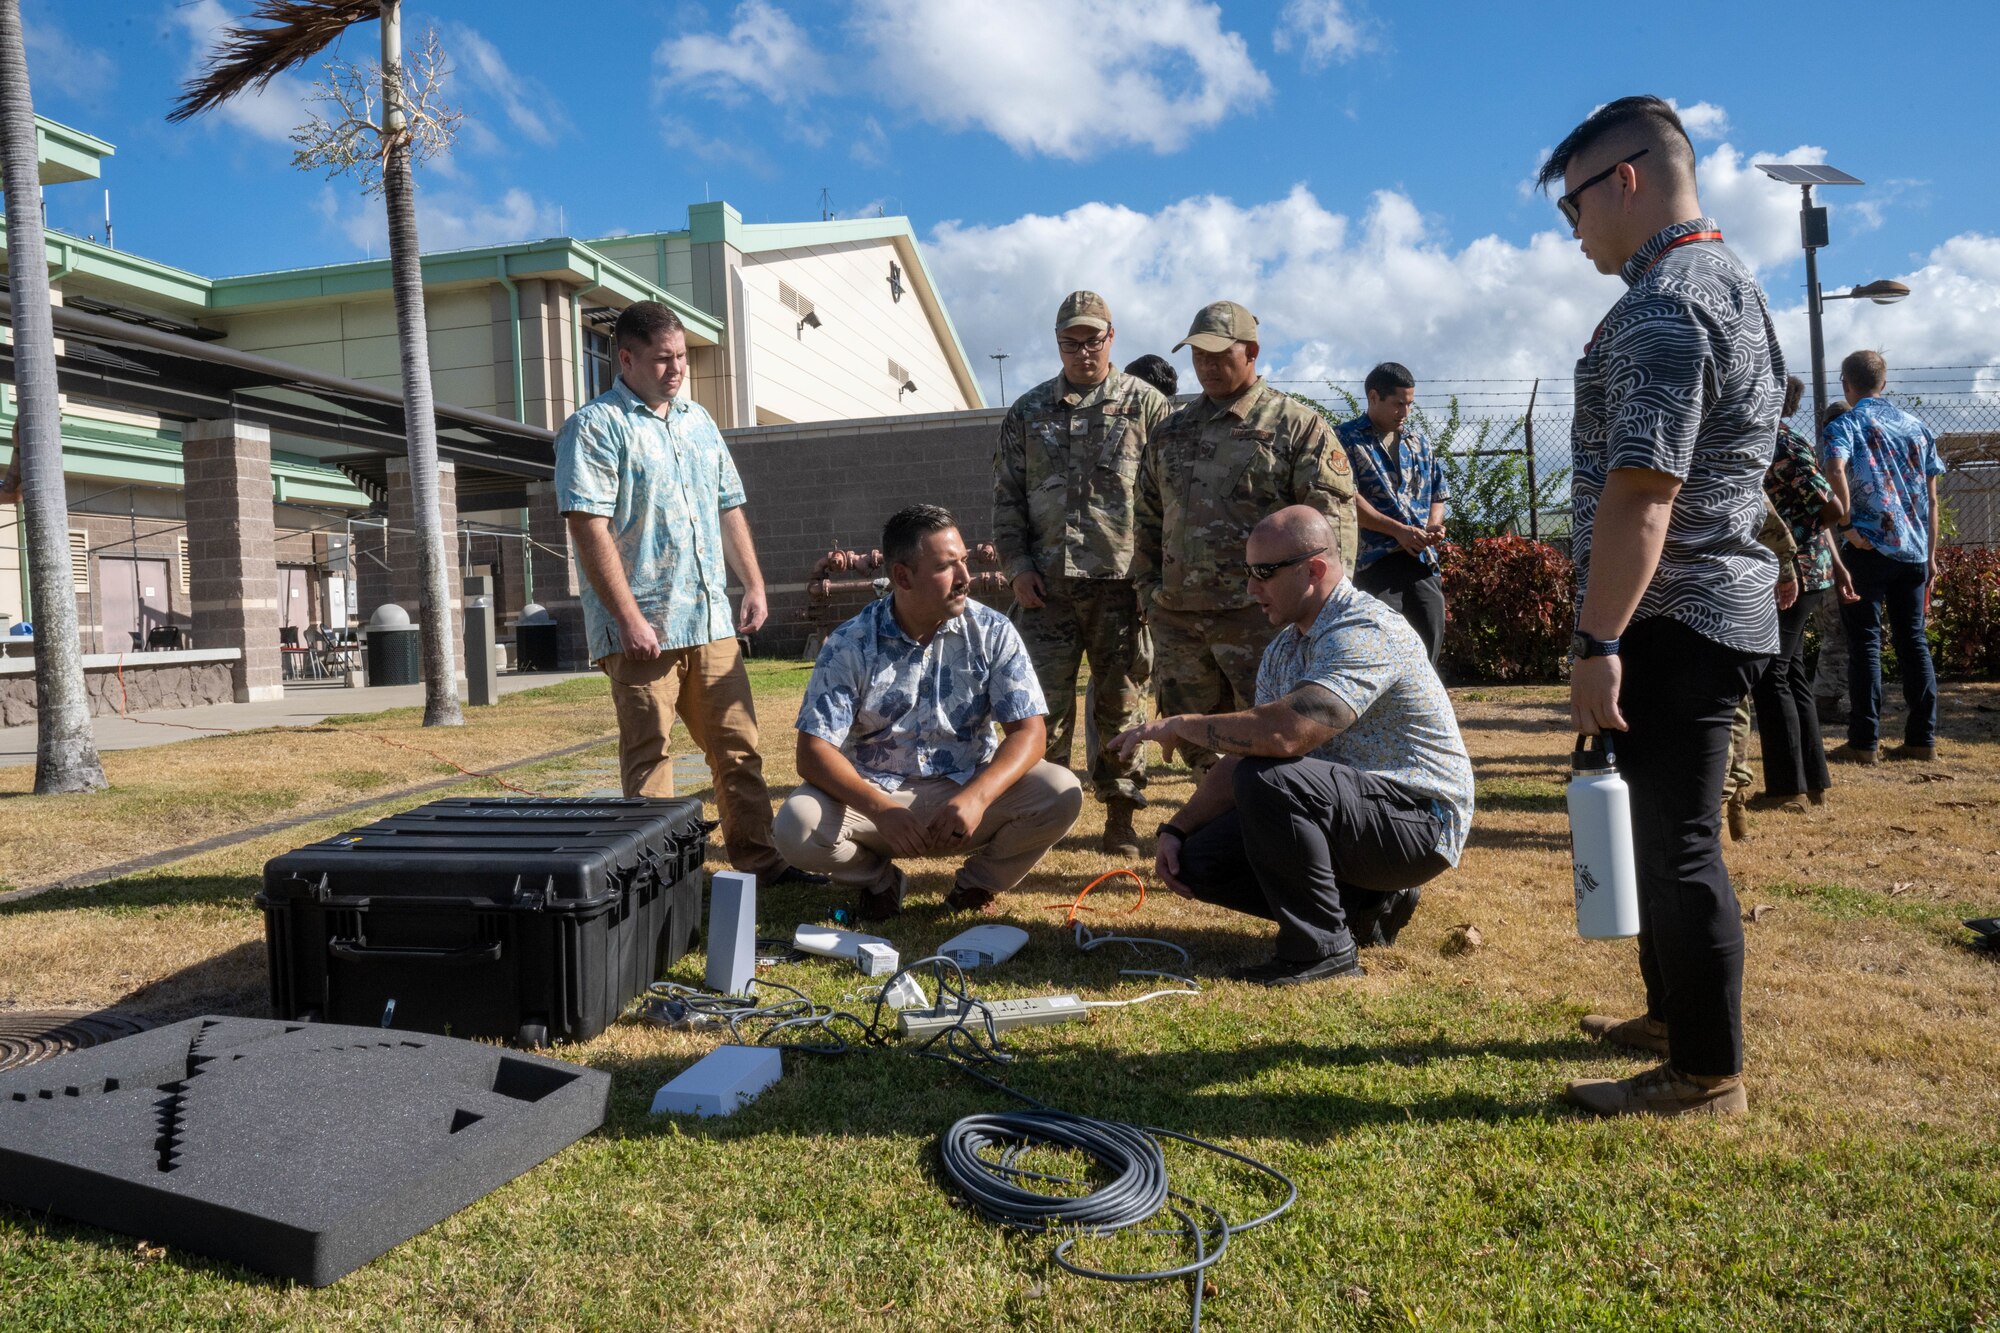 Master Sgt. Robert Phillips, 15th Maintenance Squadron production superintendent, briefs Airmen assigned to the 15th MXS how to set up a commercial satellite kit at Joint Base Pearl Harbor-Hickam, Hawaii, August 11, 2023. The 15th MXS trained in setting up and tearing down the kit, a tool that provides high-speed internet and connectivity improving communications and allows Airmen to communicate back to the 15th Maintenance Group from anywhere around the globe. (U.S. Air Force photo by Senior Airman Makensie Cooper)